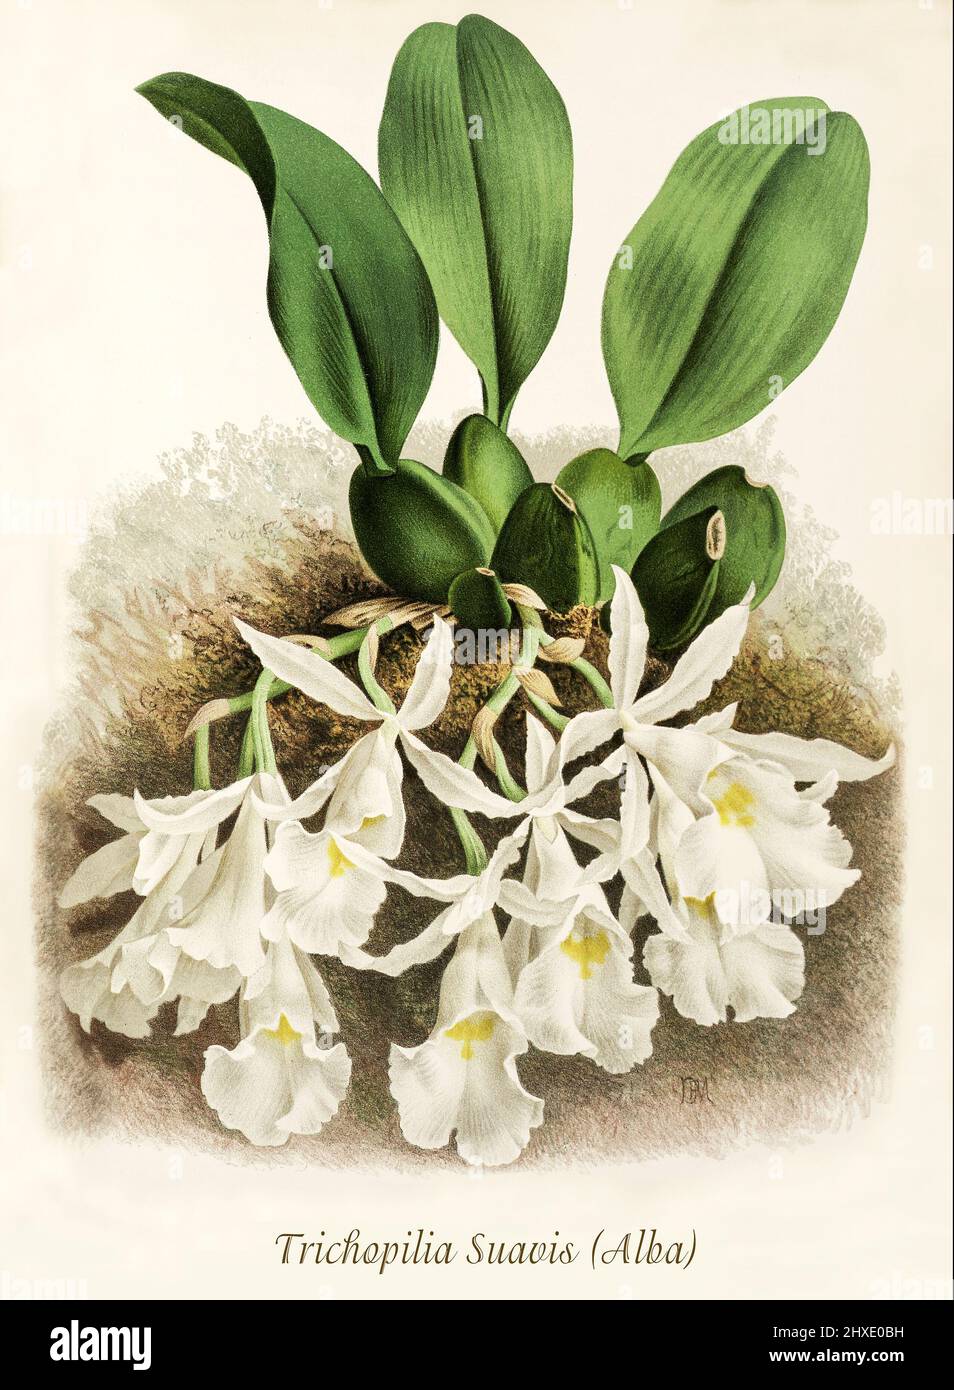 Trichopilia suavis is a species of orchid found from Central America to Colombia. The plants will blossom in the seasons of Spring and Winter at intermediate warm temperatures. From Iconographie des Orchidees, a magazine of botanical illustrations published by Jean Jules Linden (1817-1898) was a Belgian botanist, explorer and horticulturist who specialised in orchids. Stock Photo